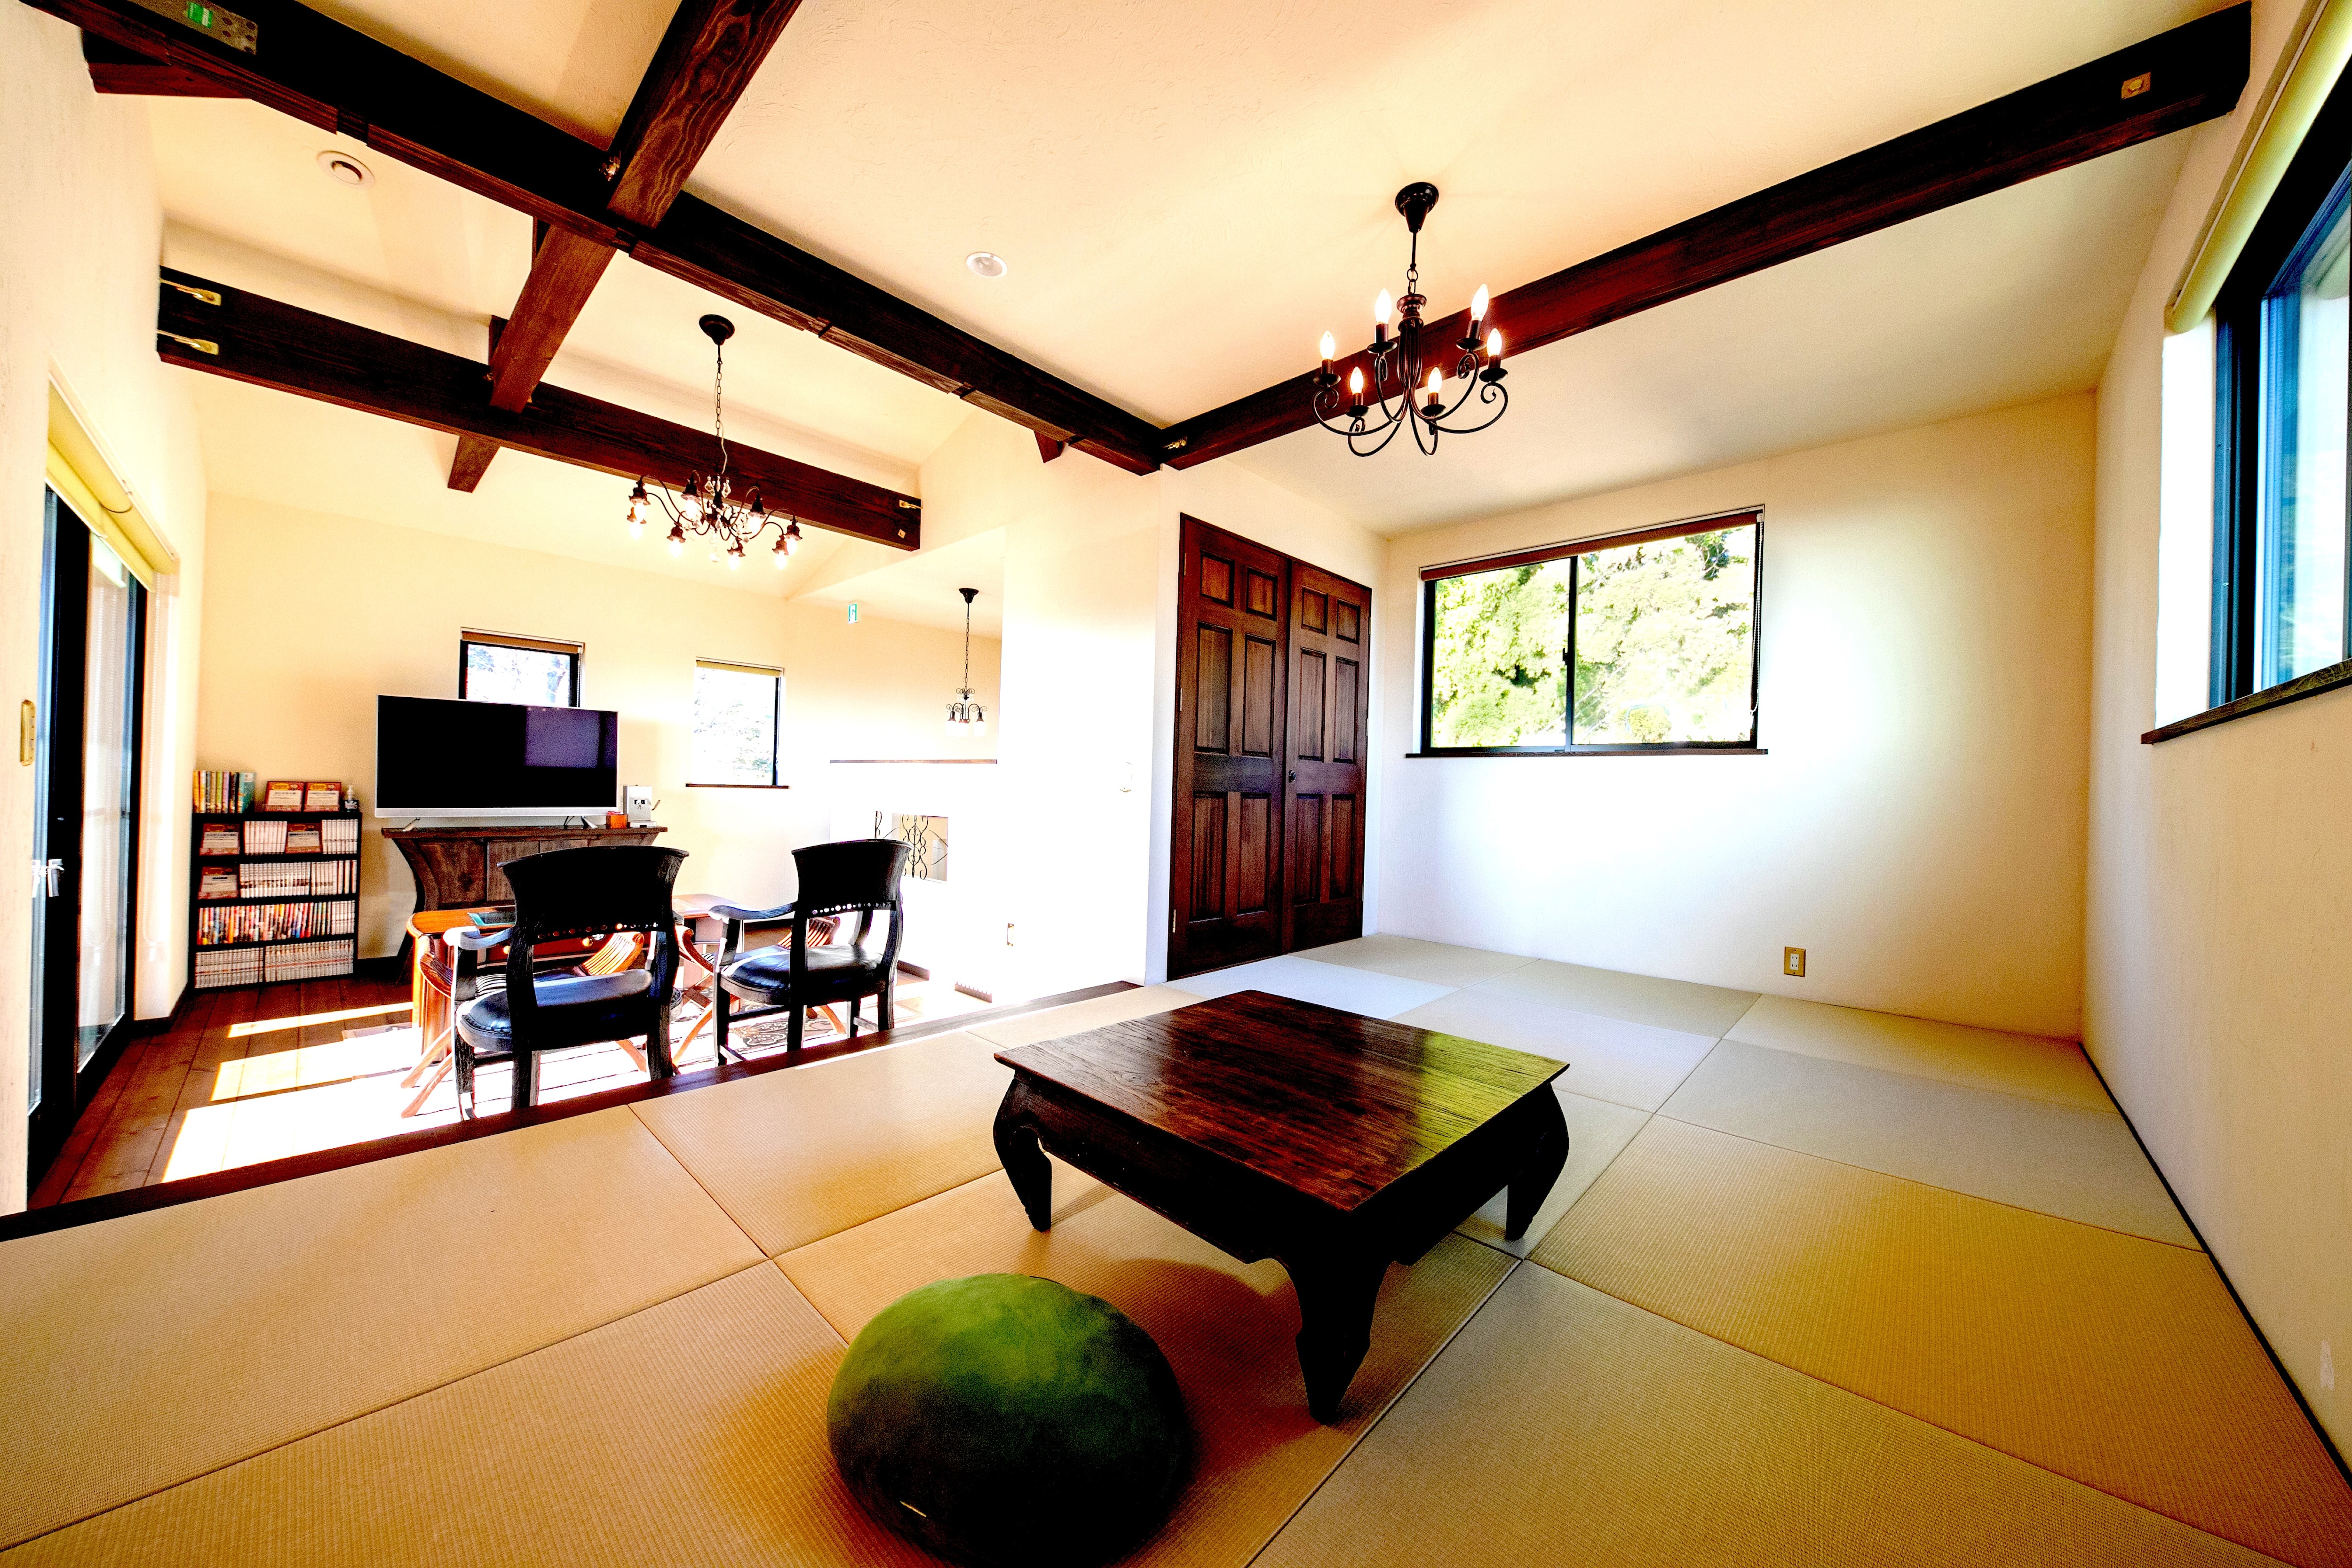 Grand view: Japanese-style room